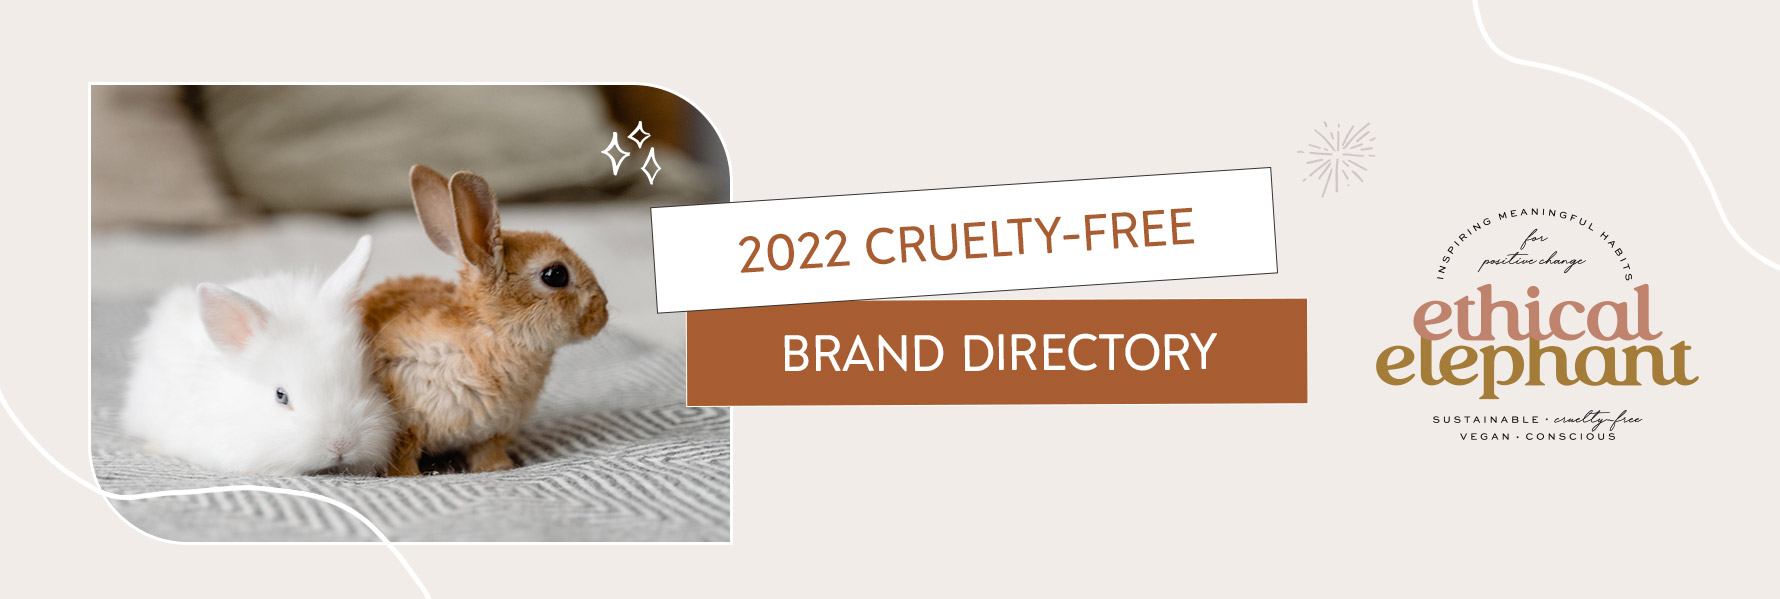 2022 Cruelty-Free Brand Directory by ethical elephant